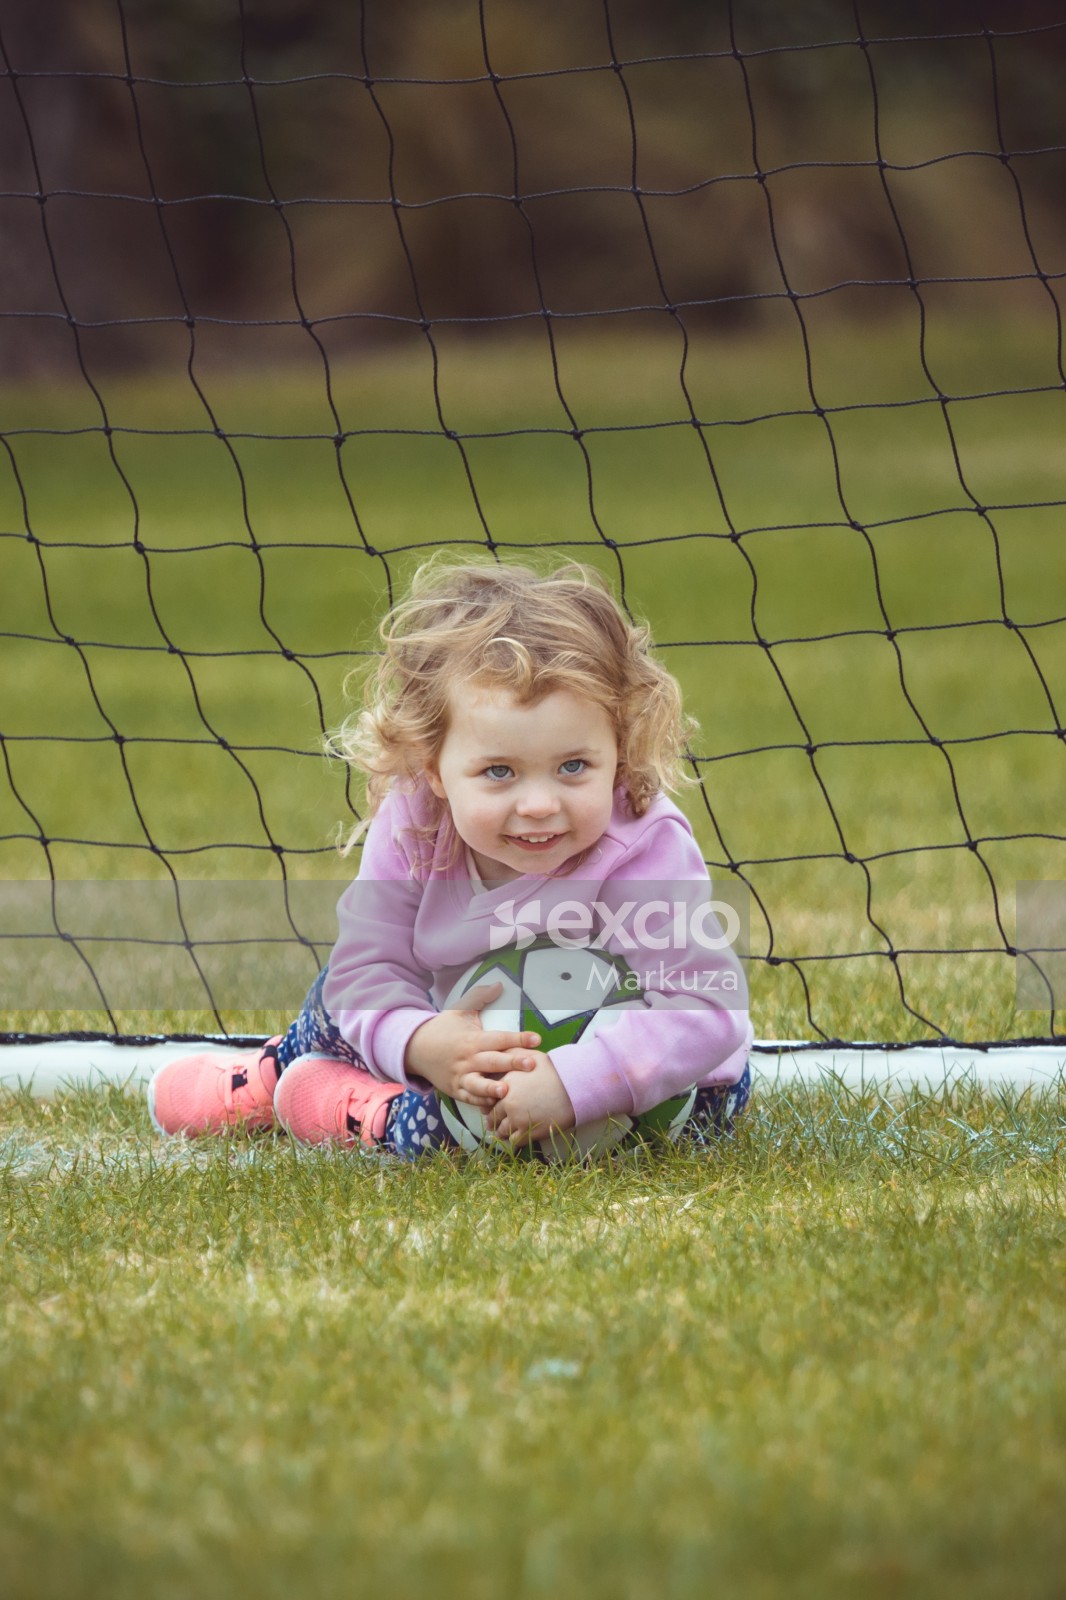 Grey eyed girl holding onto a football - Little Dribblers